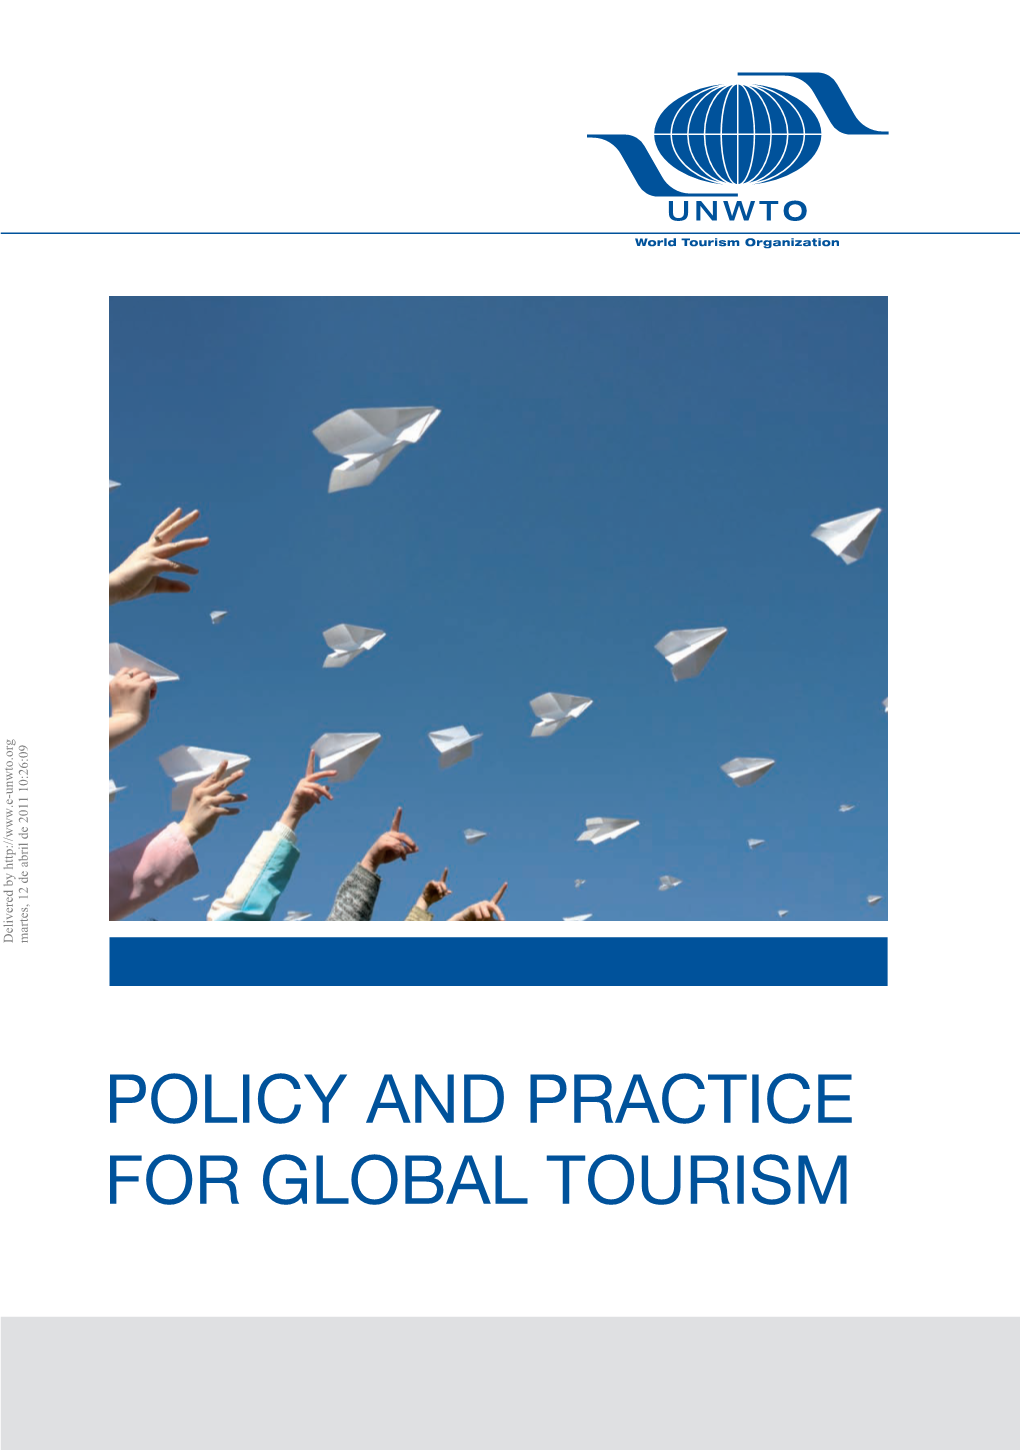 POLICY and PRACTICE for GLOBAL TOURISM Delivered by Martes, 12 De Abril 2011 10:26:09